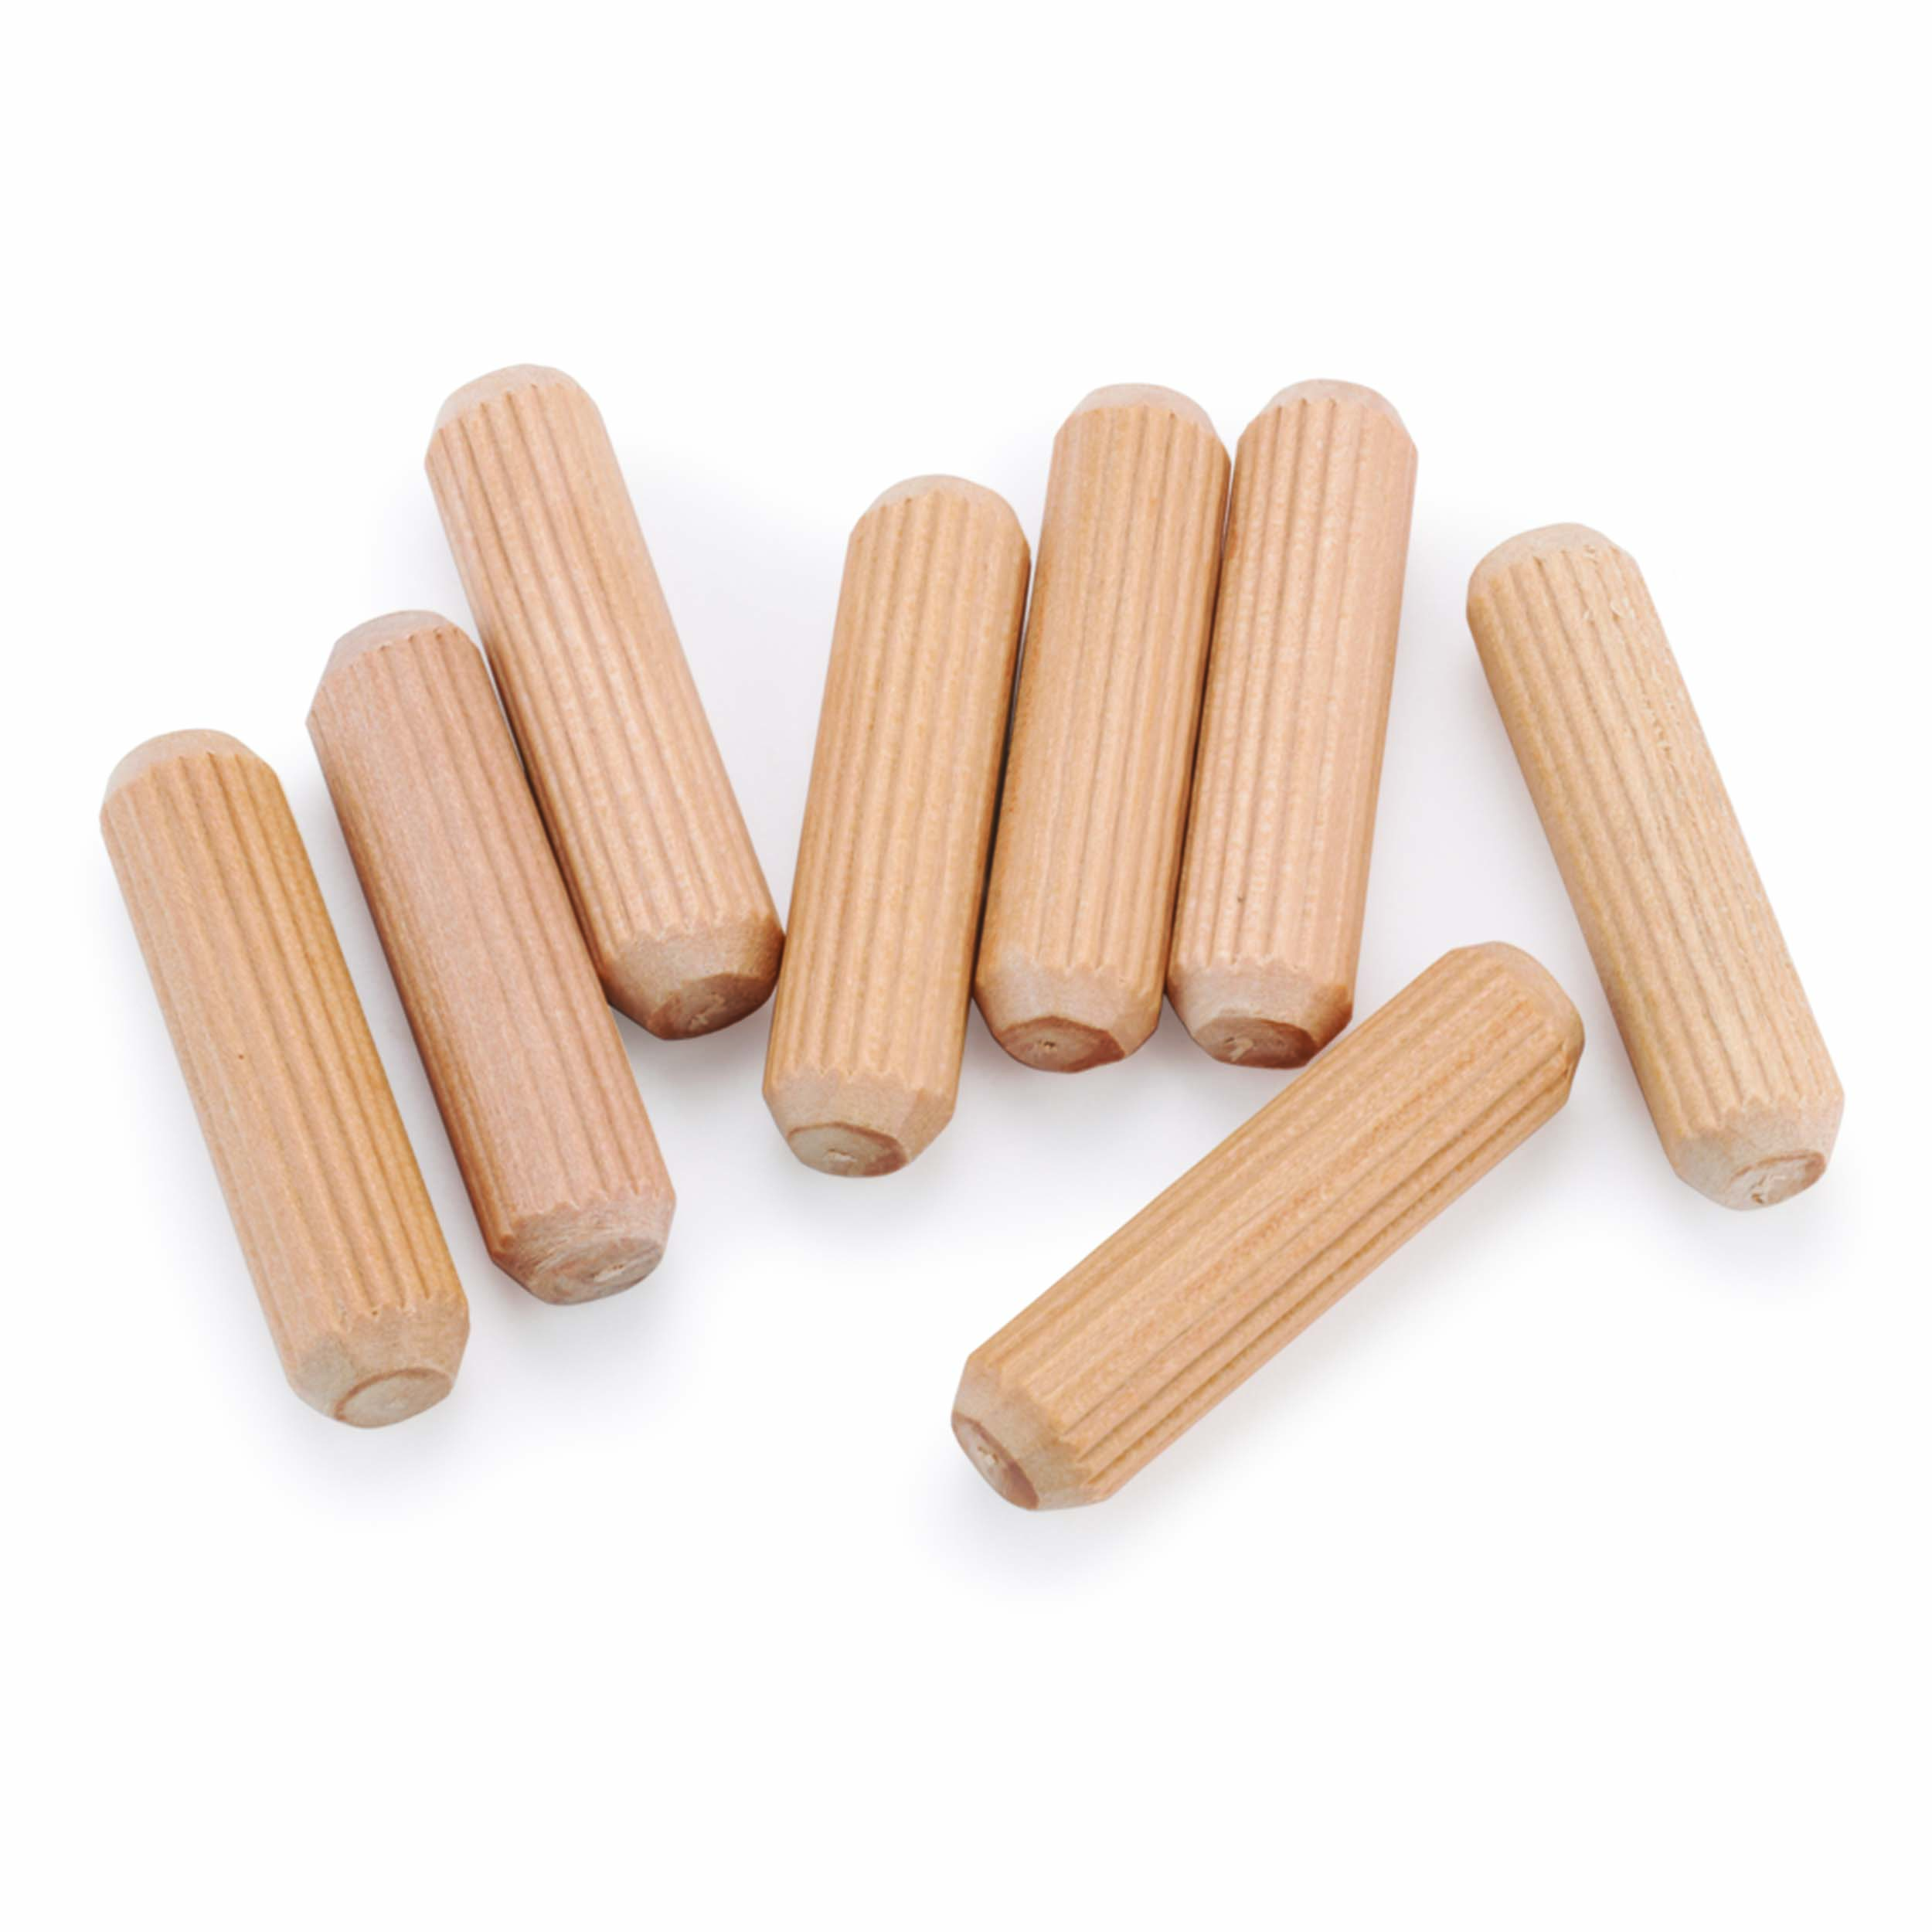 30-count 3/8-inch Fluted Dowel Pins